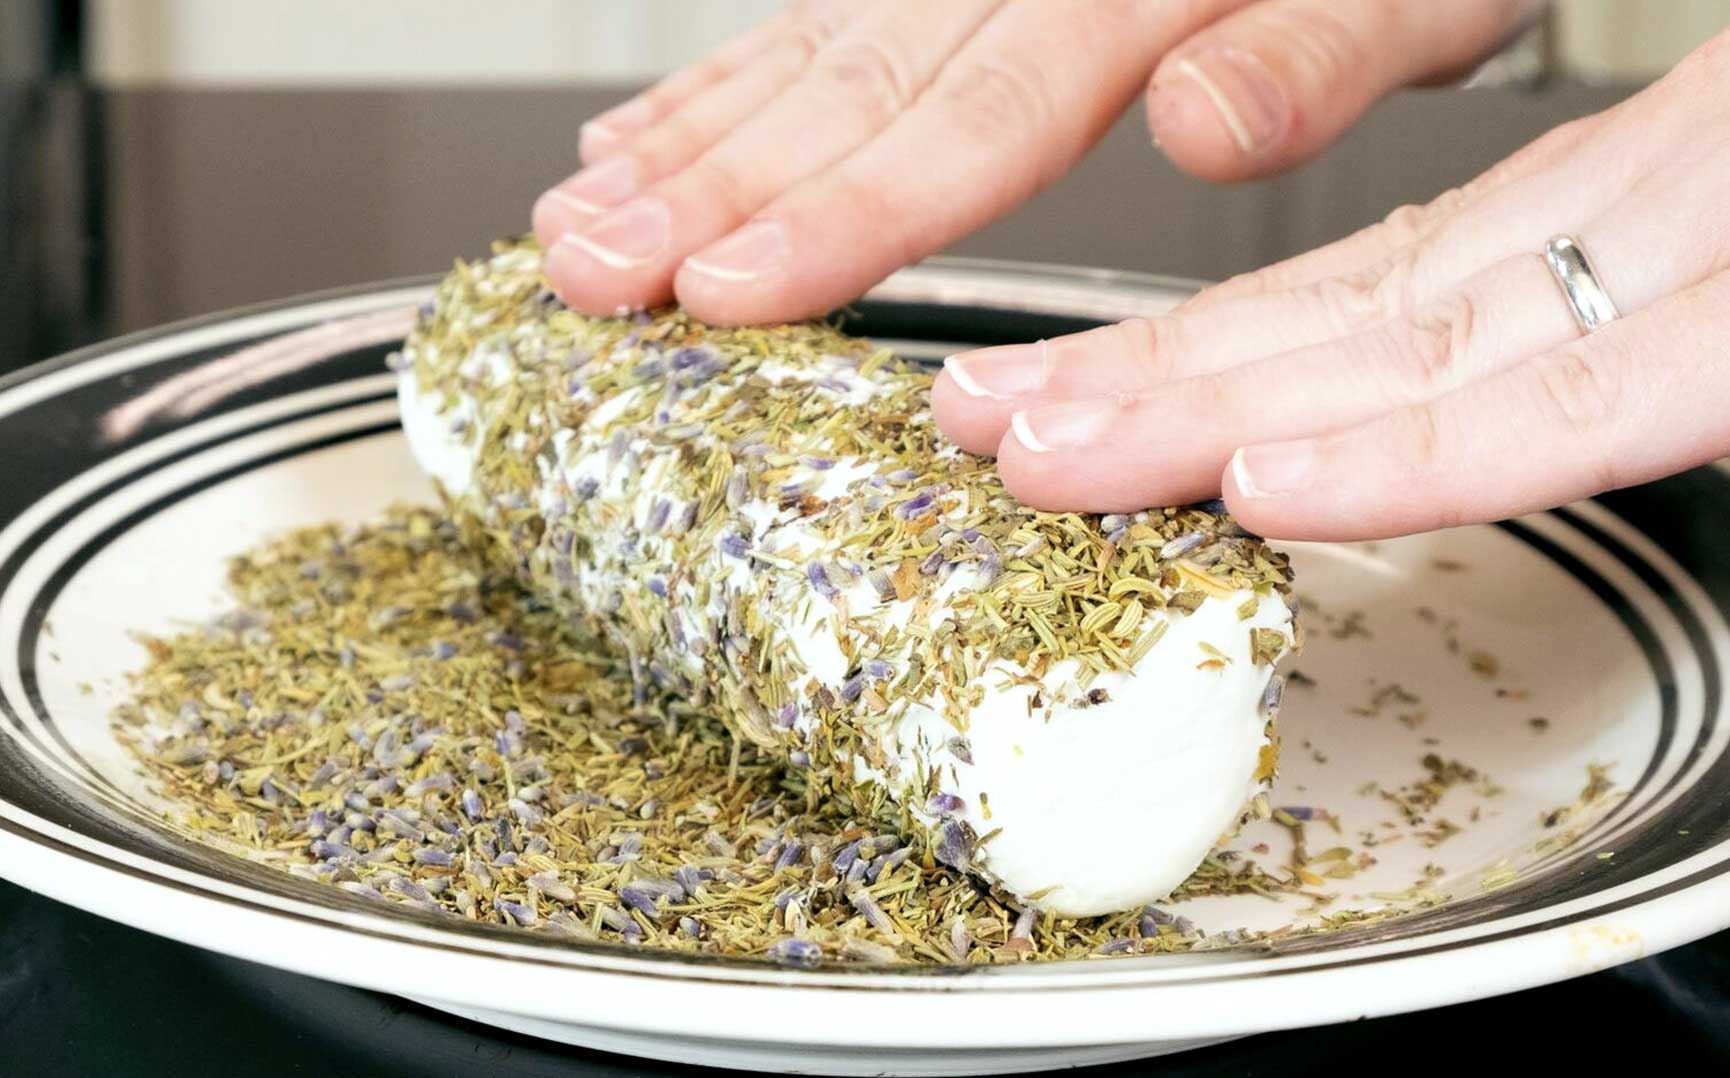 Adding herbs to homemade cheese